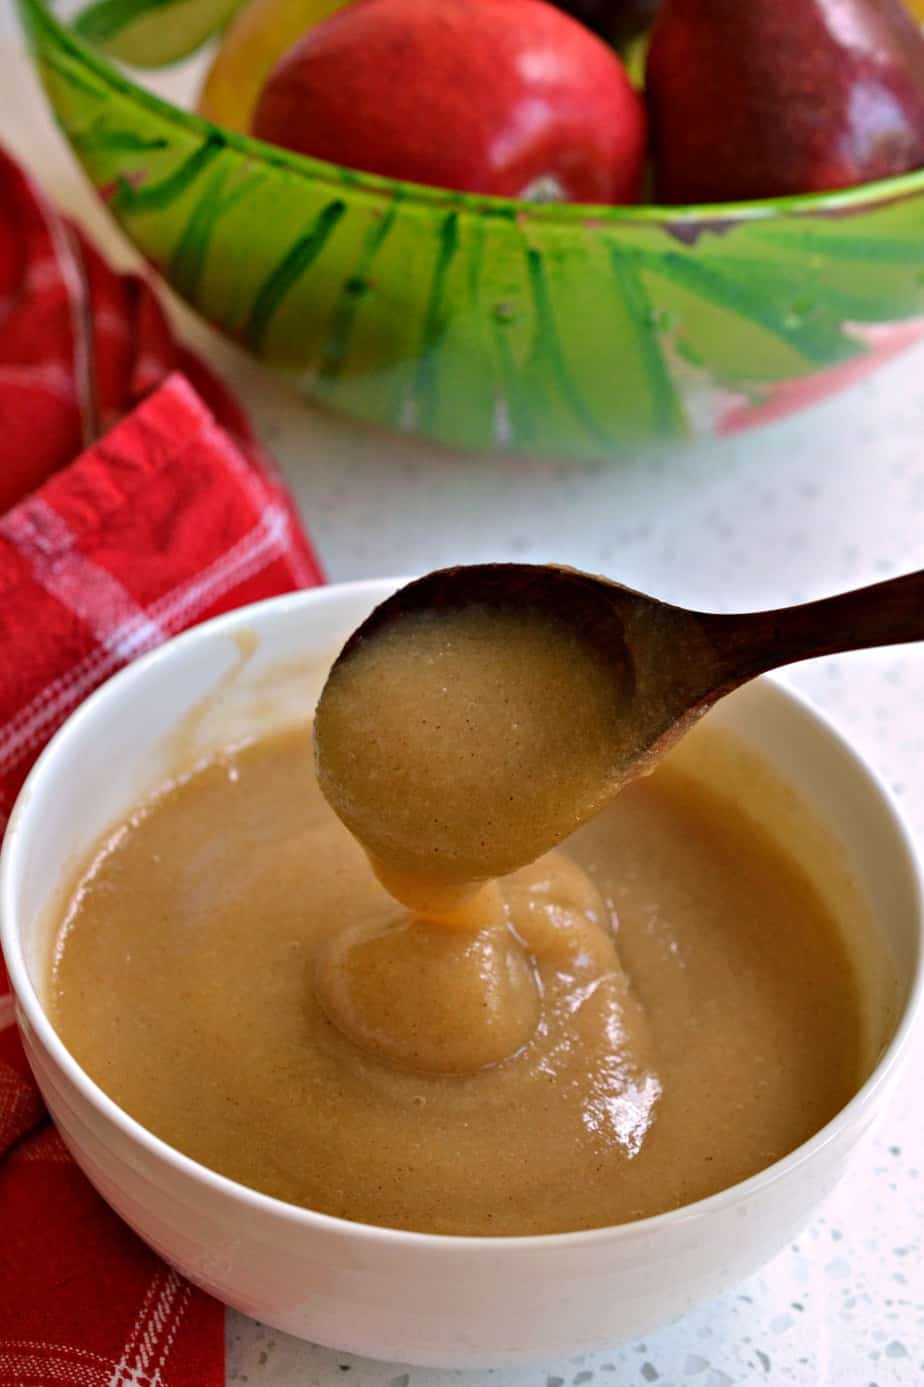 Let this delectable Homemade Applesauce slow cook in the crock pot all day and your house will smell amazing. 